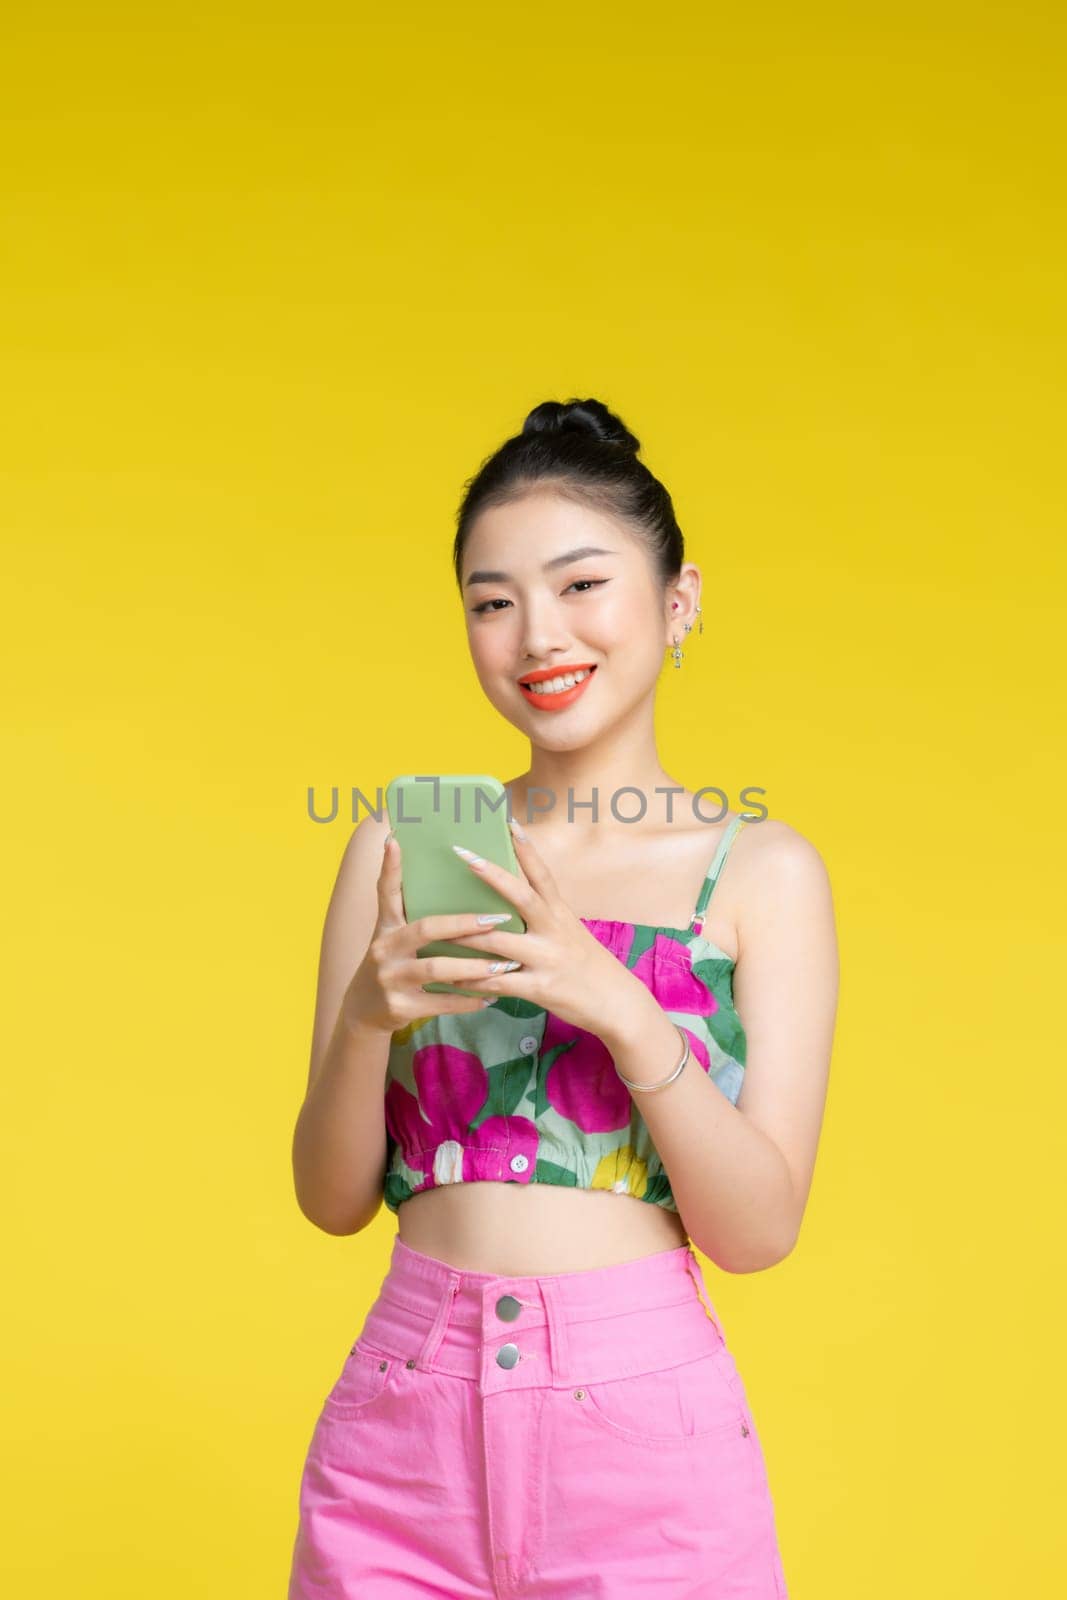 Portrait of a smiling casual woman holding mobile phone over yellow background